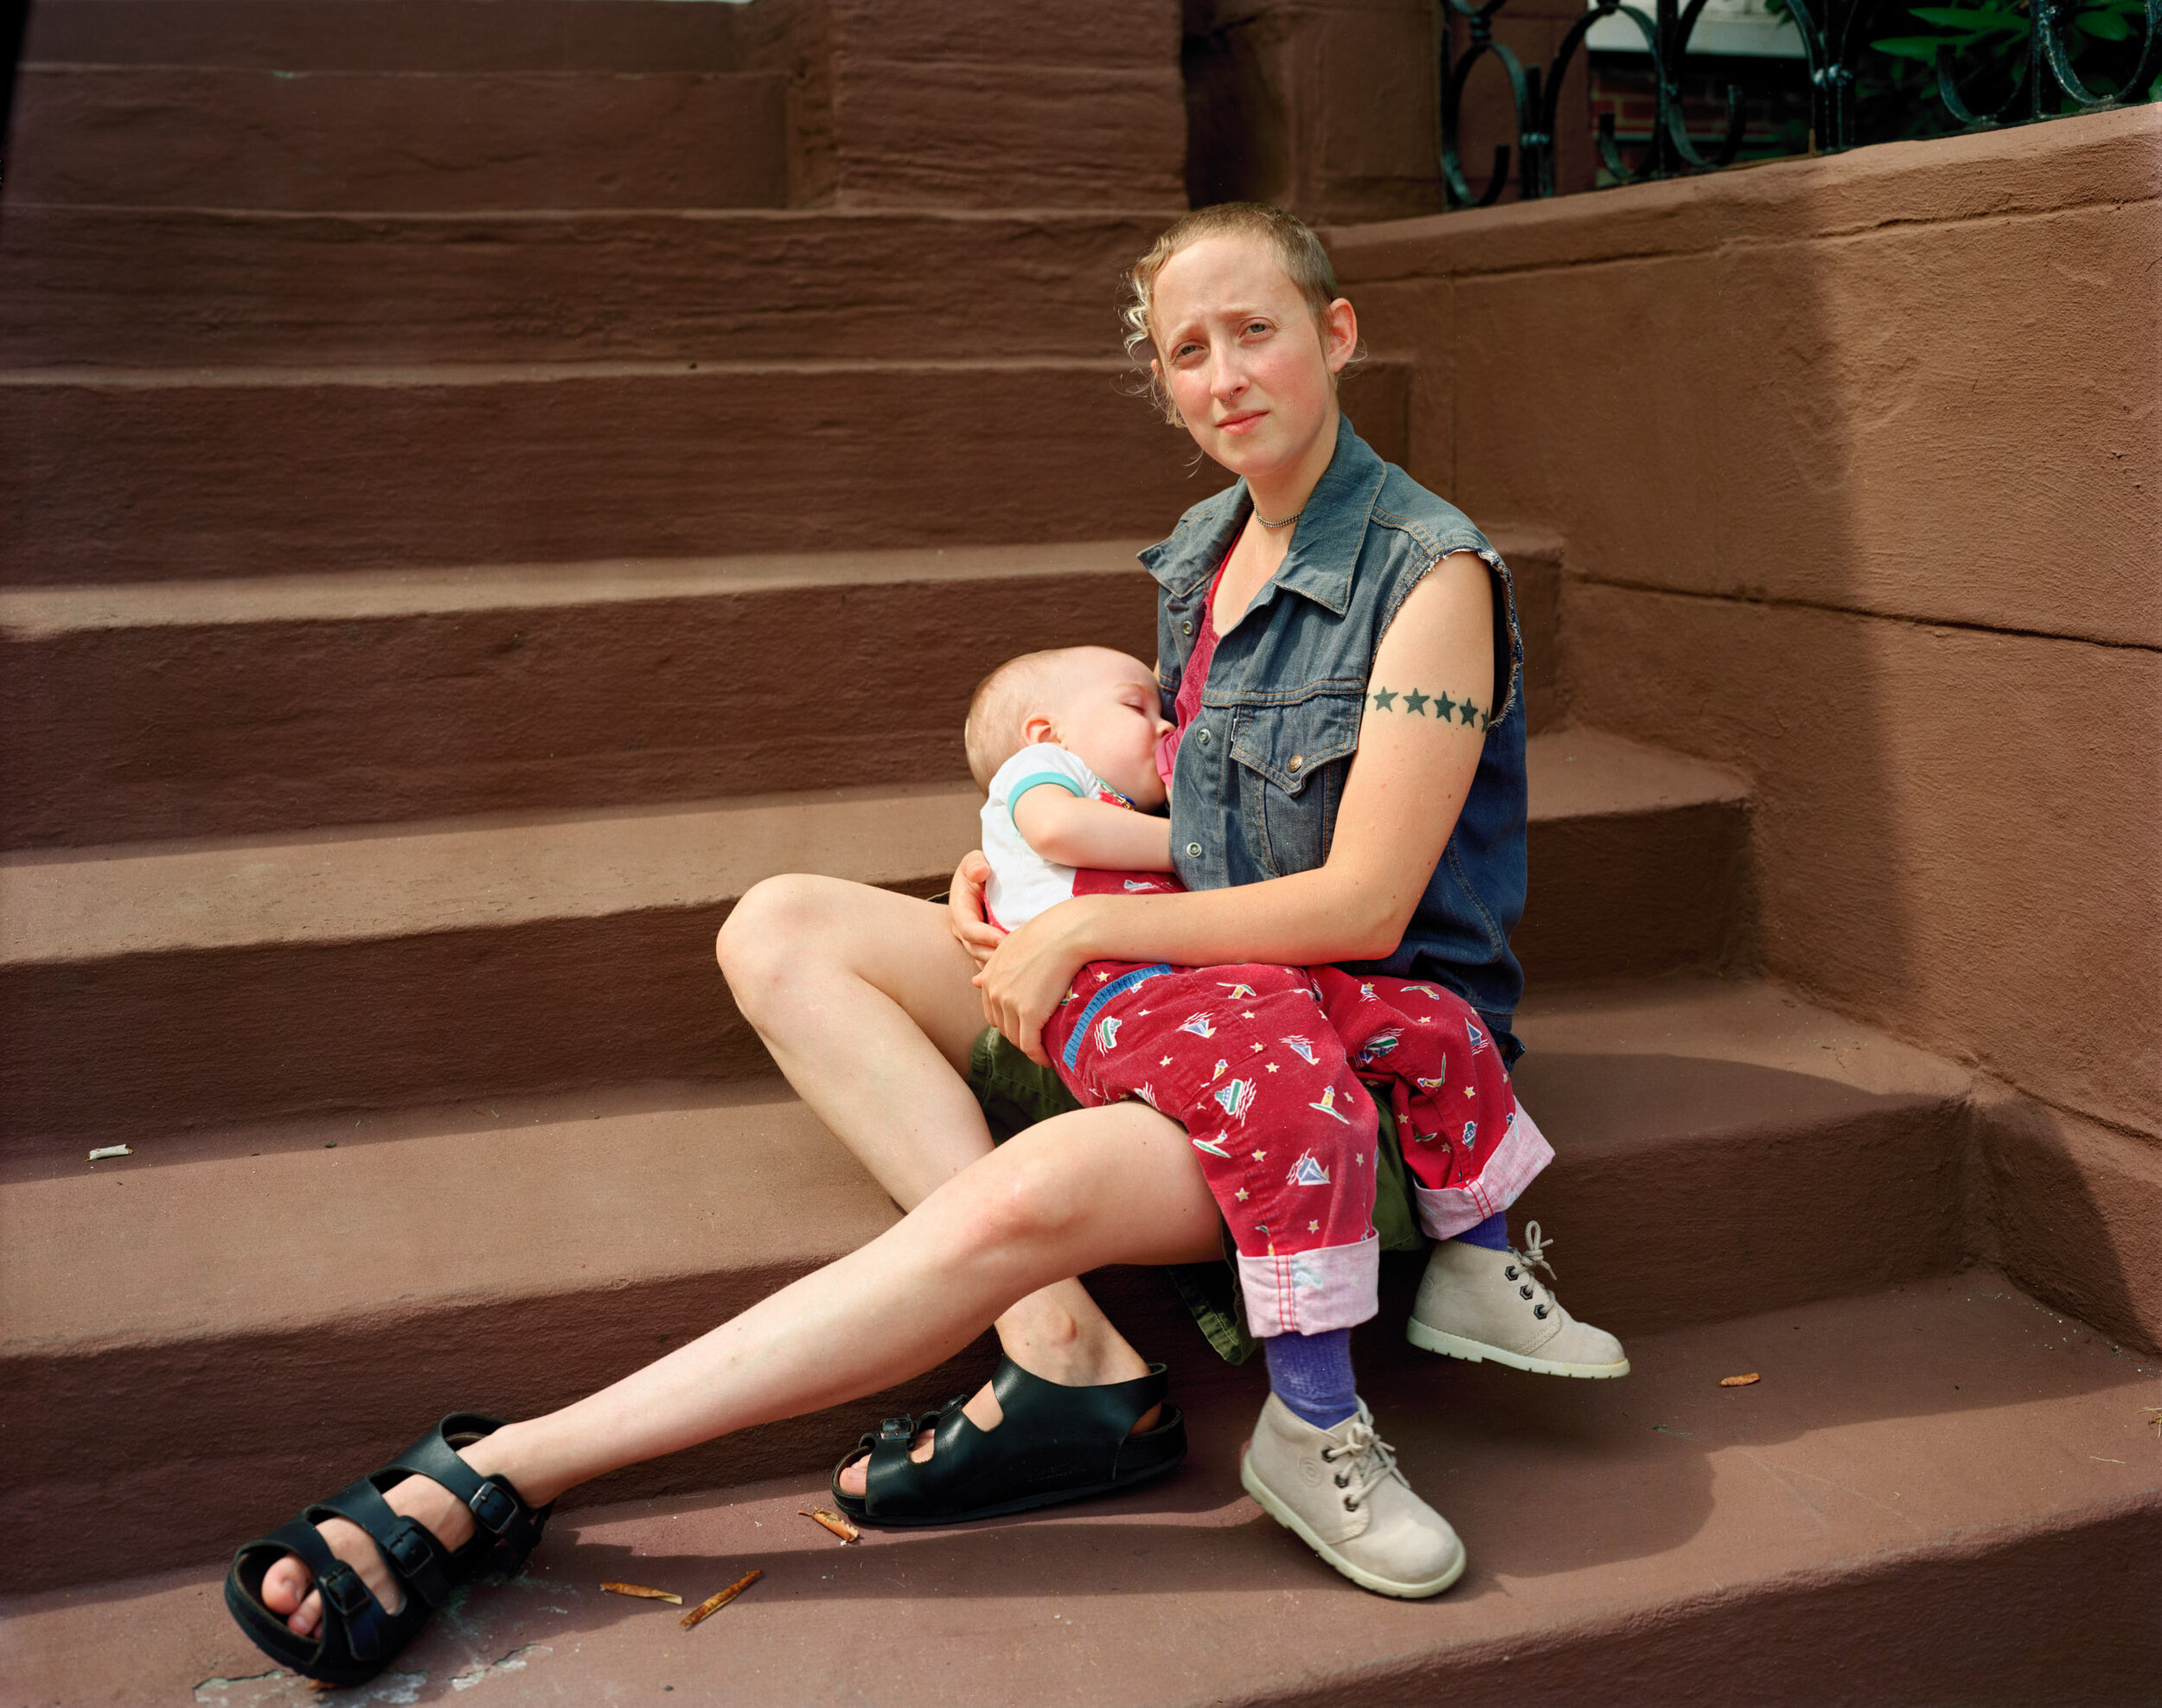 A Mother with Her Child, Portland, Maine, August 1998